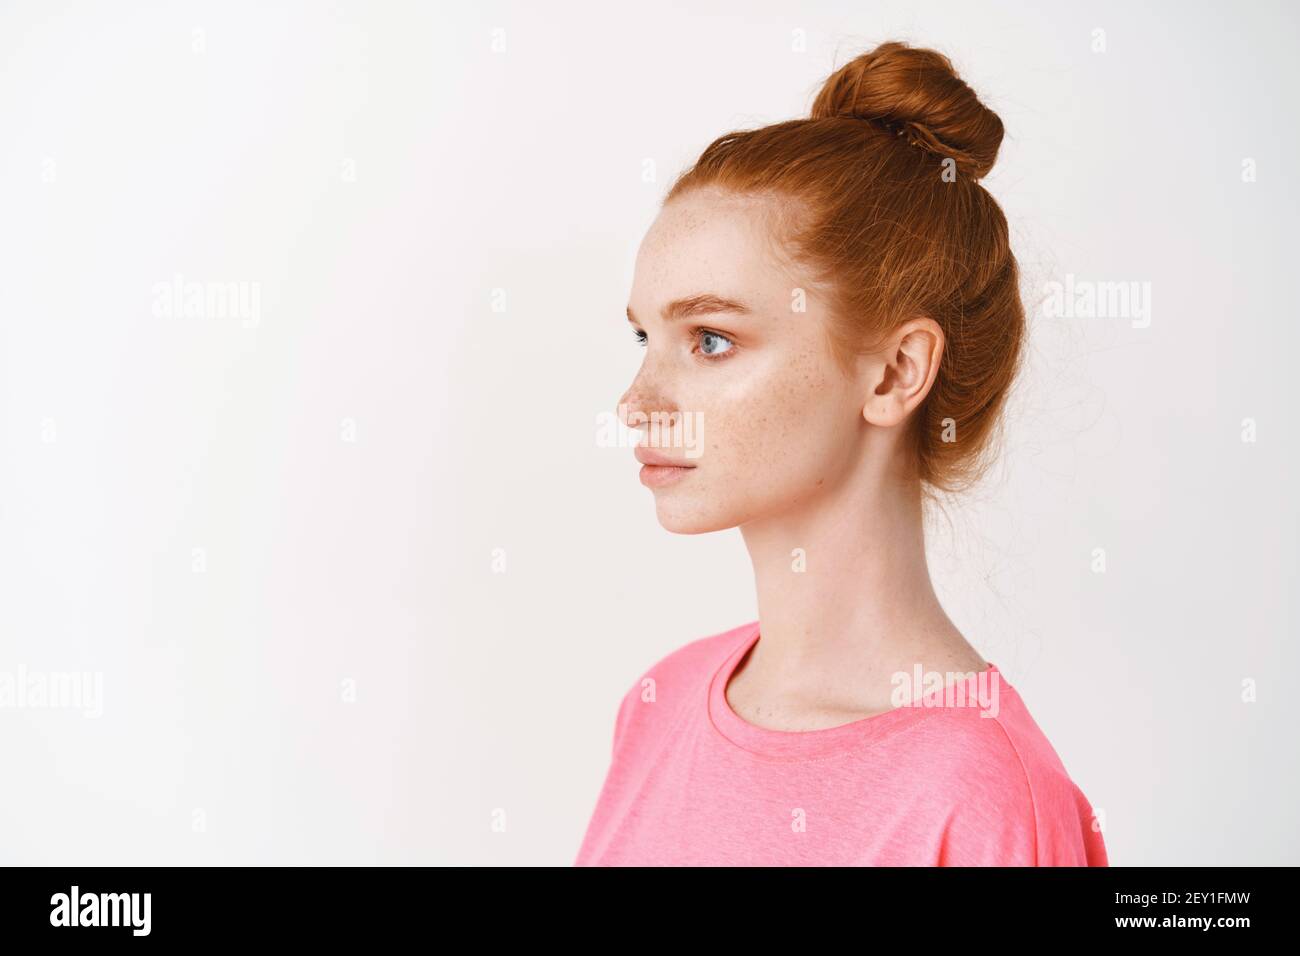 Skincare and makeup concept. Profile of young woman with natural red hair combed in messy bun, looking left, standing over white background. Facial Stock Photo